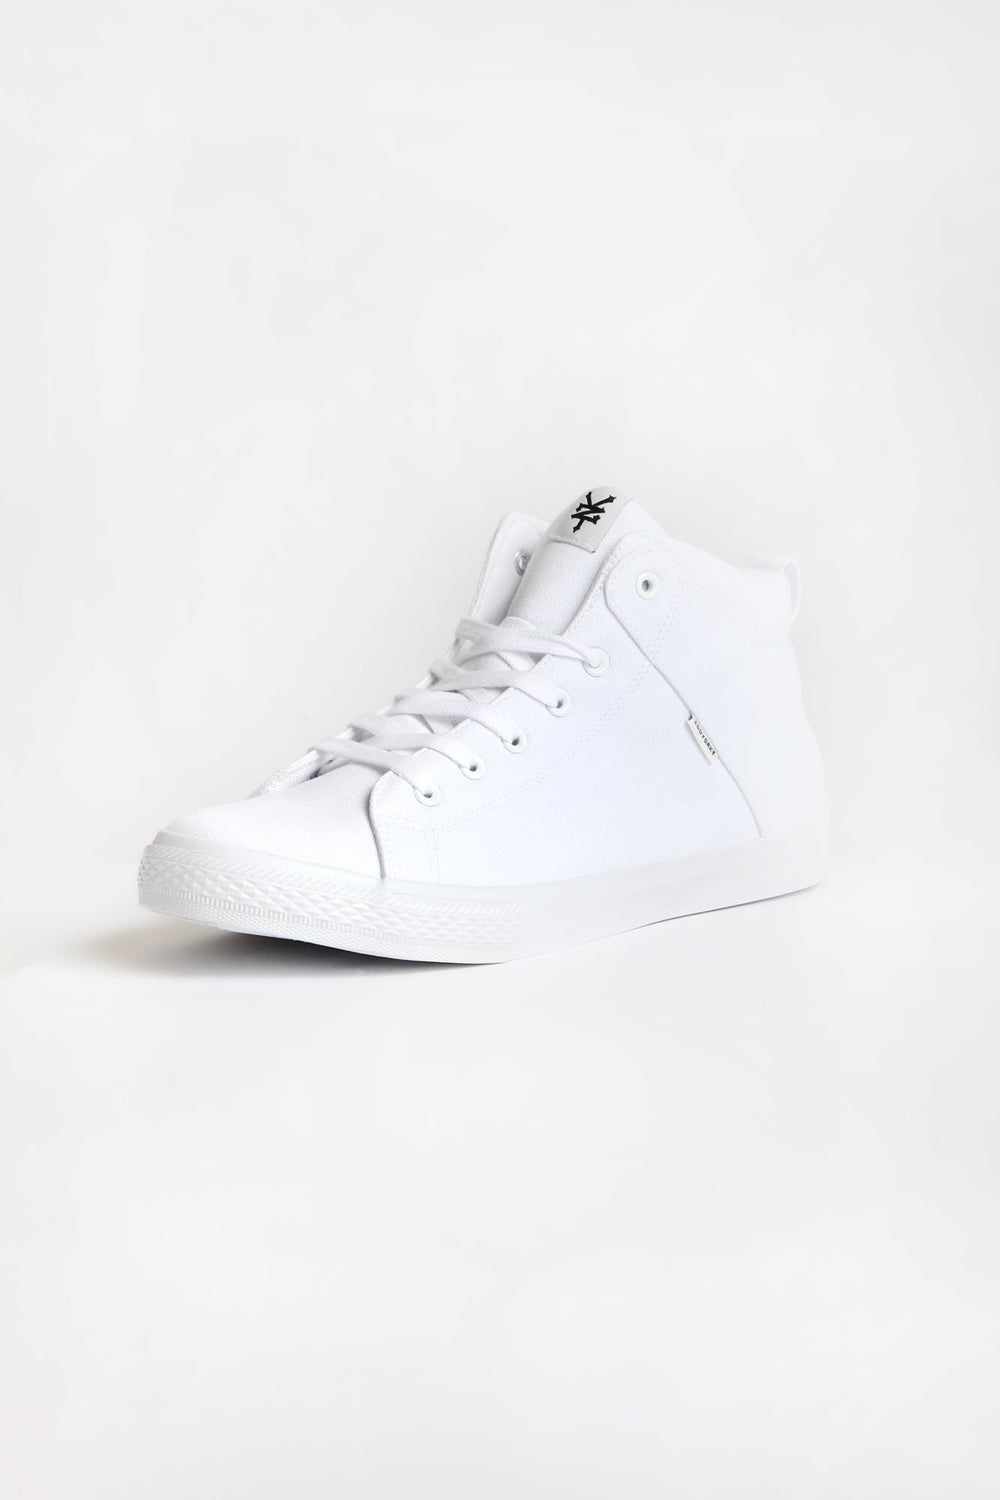 Zoo York Youth White Mid Tops Zoo York Youth White Mid Tops